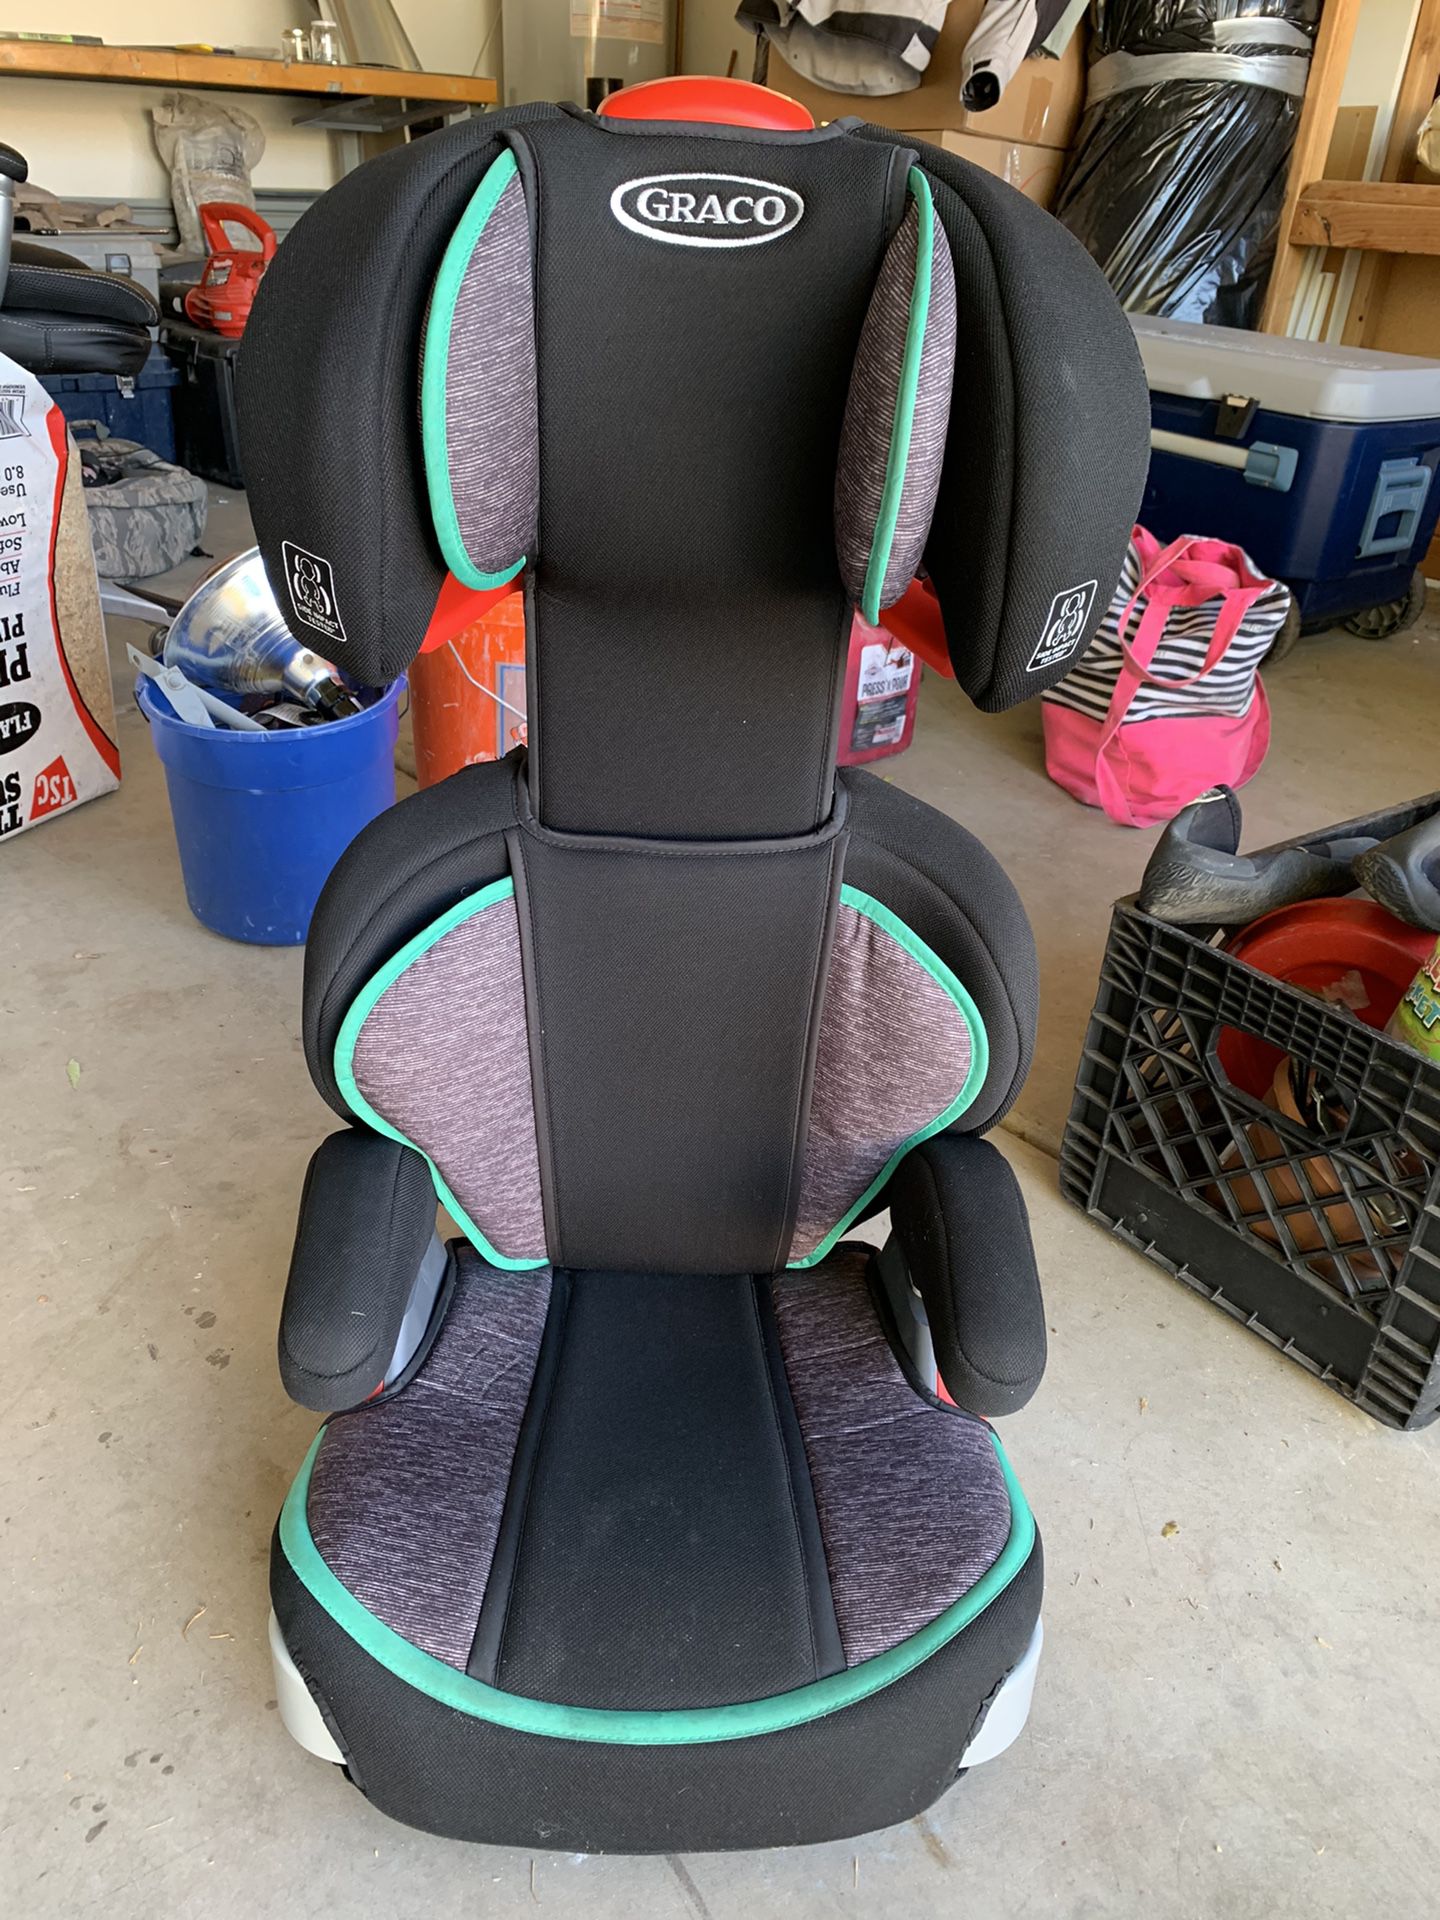 *MUST GO TODAY!* $10 Graco TurboBooster Highback Booster Car Seat - Novi